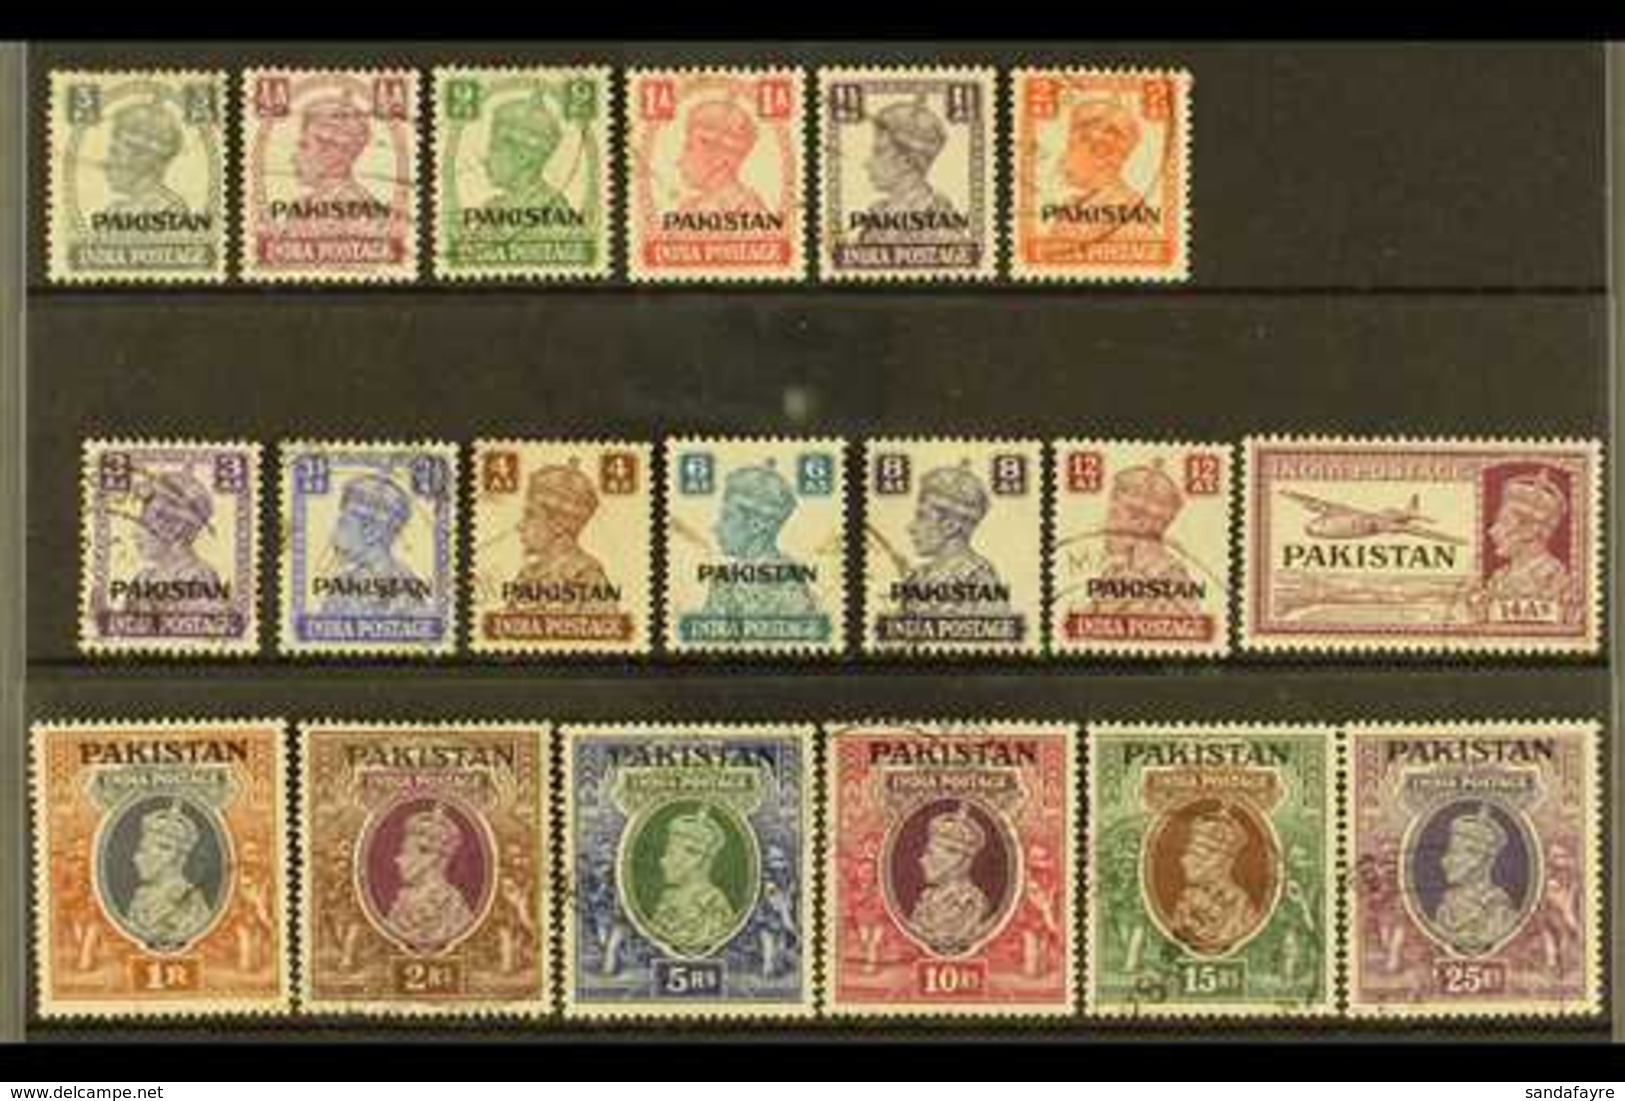 1948 KGV Of India Opt'd Complete Set, SG 1/19, 15r With A Short Perf, The Rest Are Fine Used (19 Stamps) For More Images - Pakistán